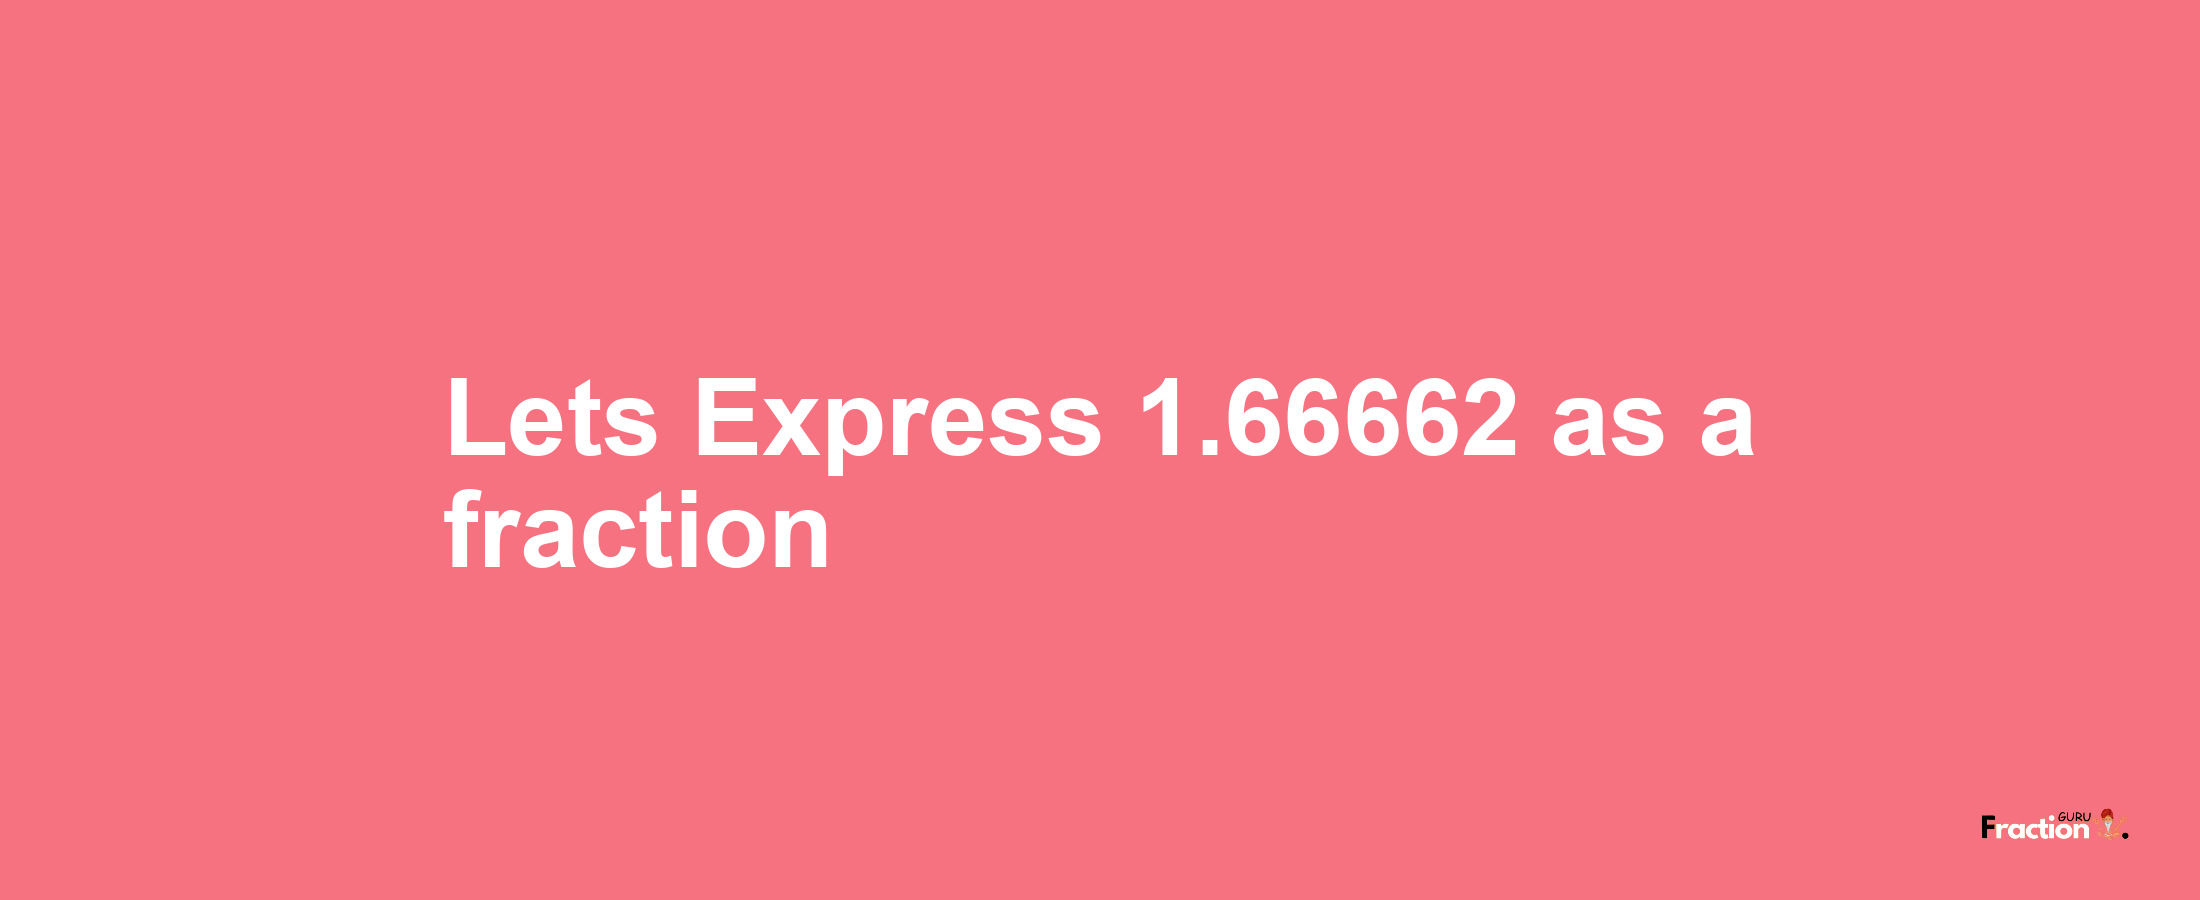 Lets Express 1.66662 as afraction